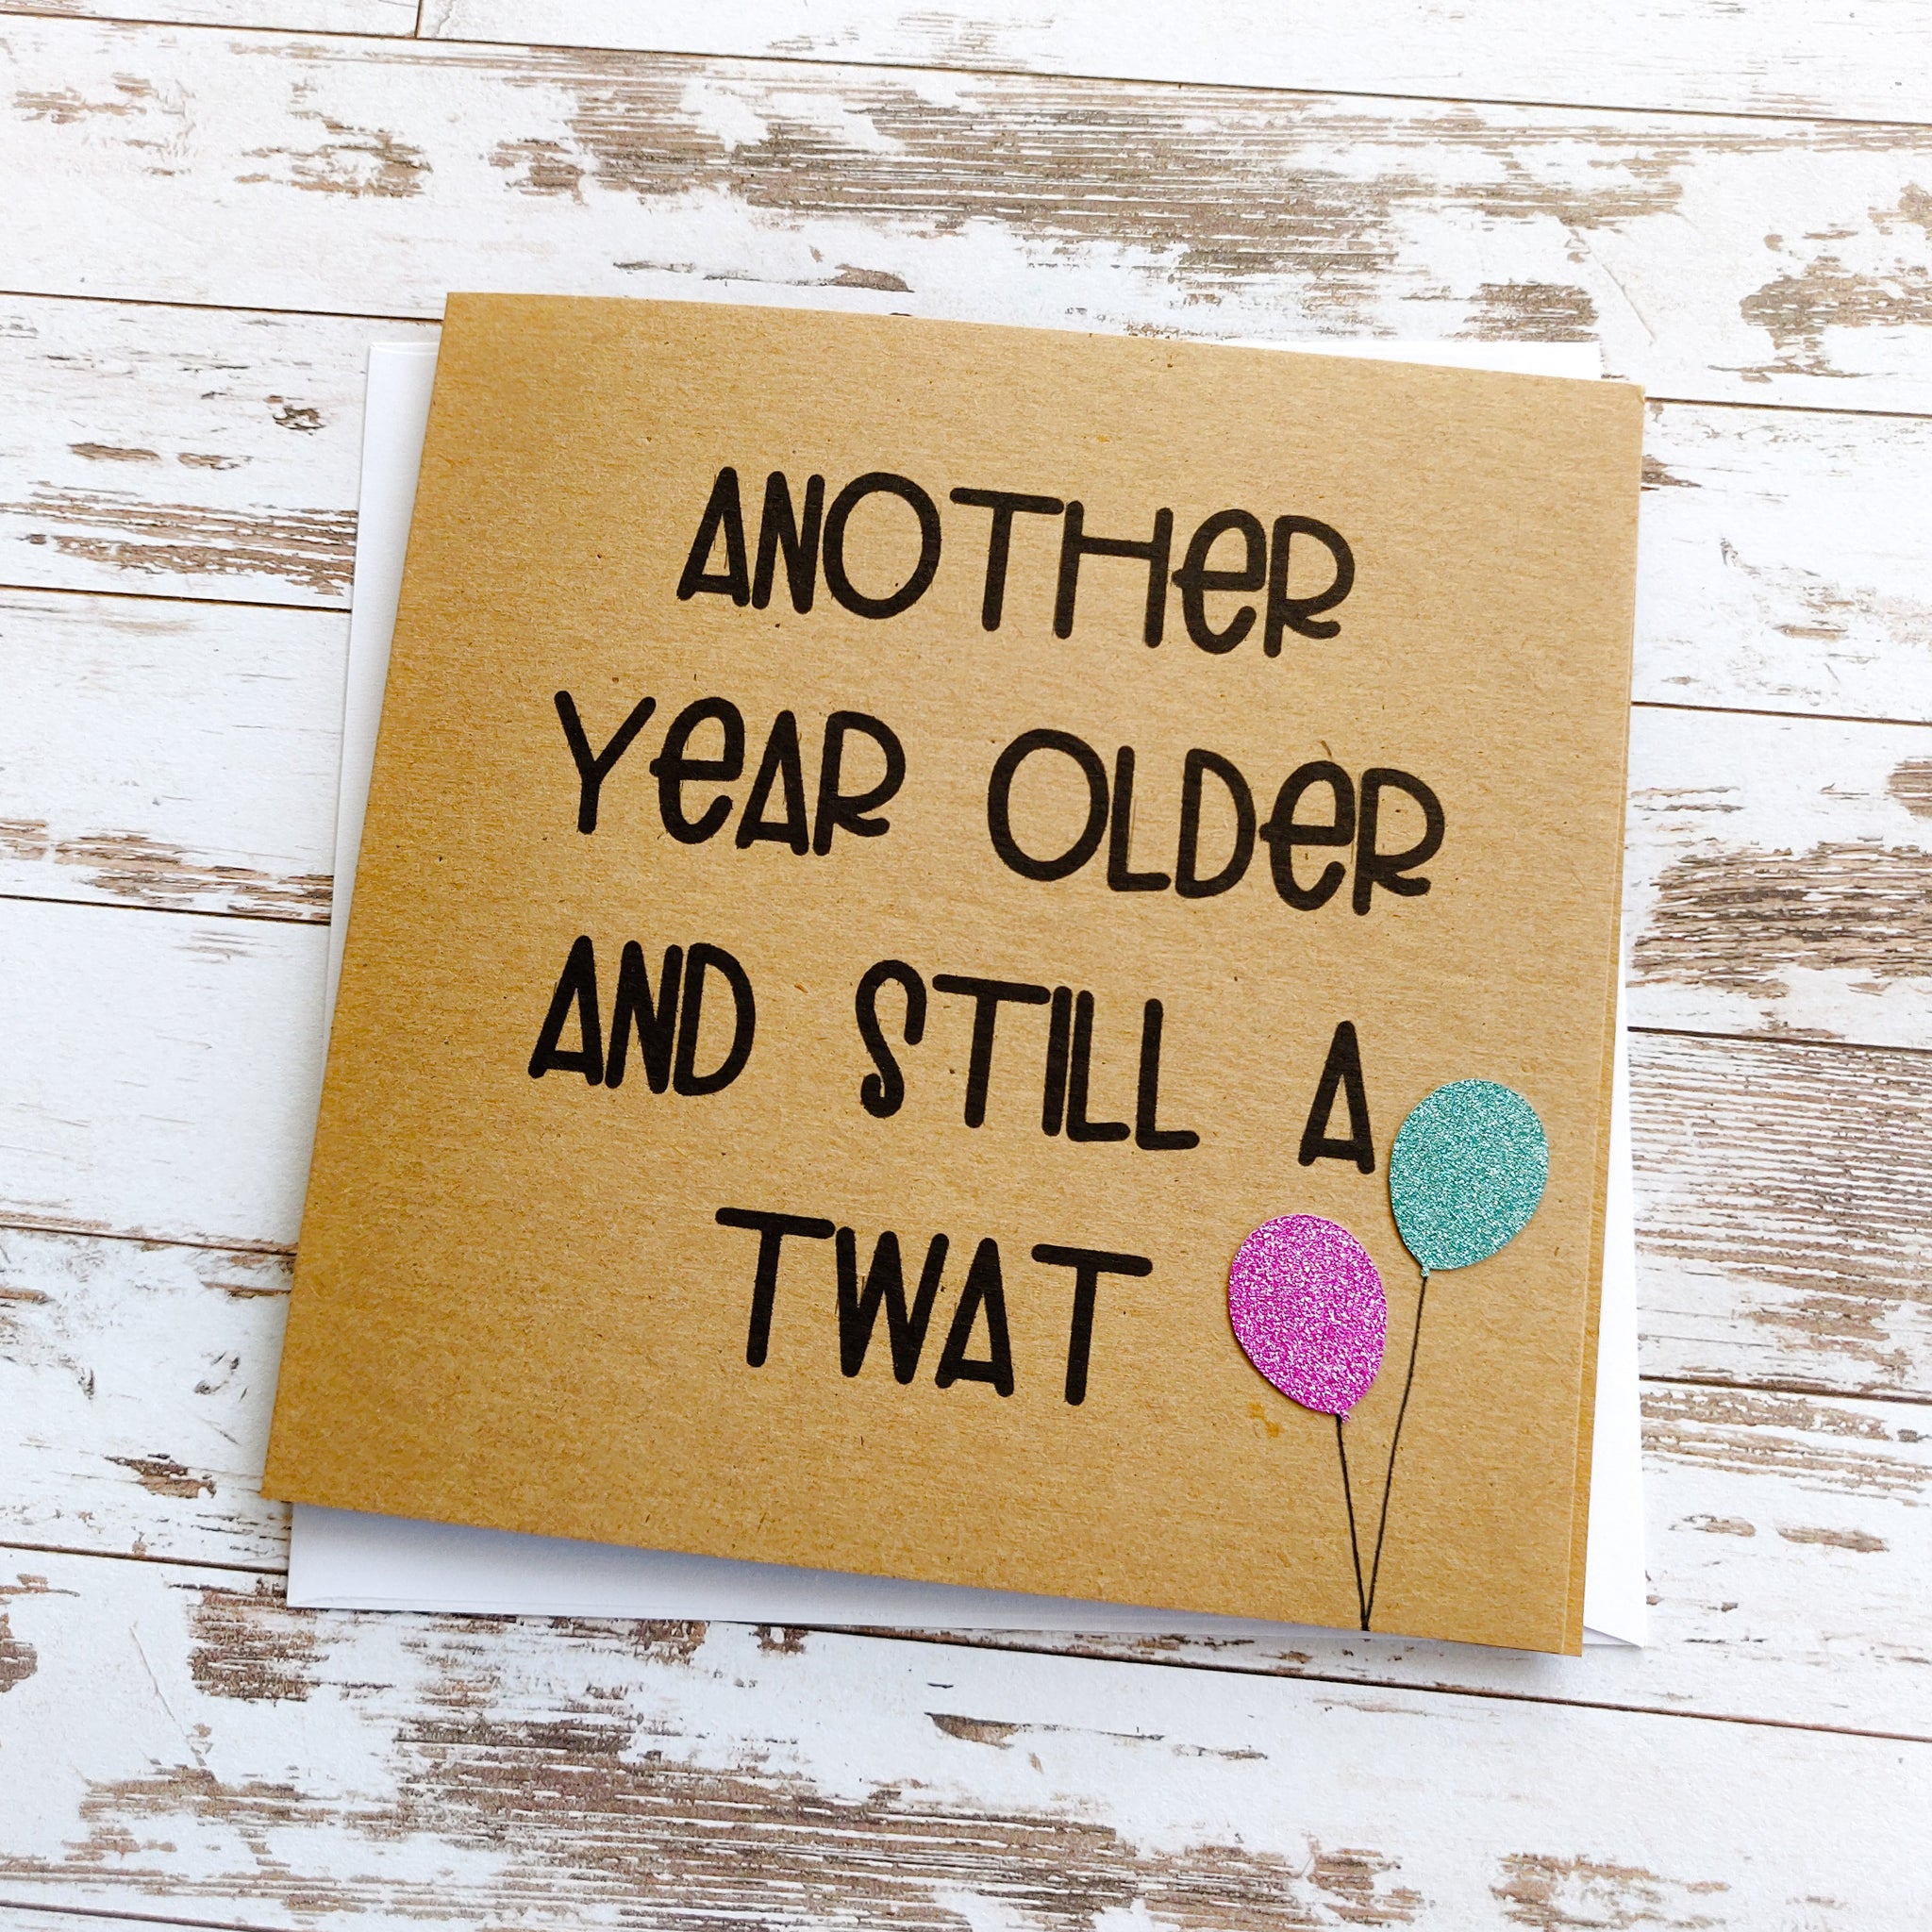 "Another year older and still a twat" handmade birthday card